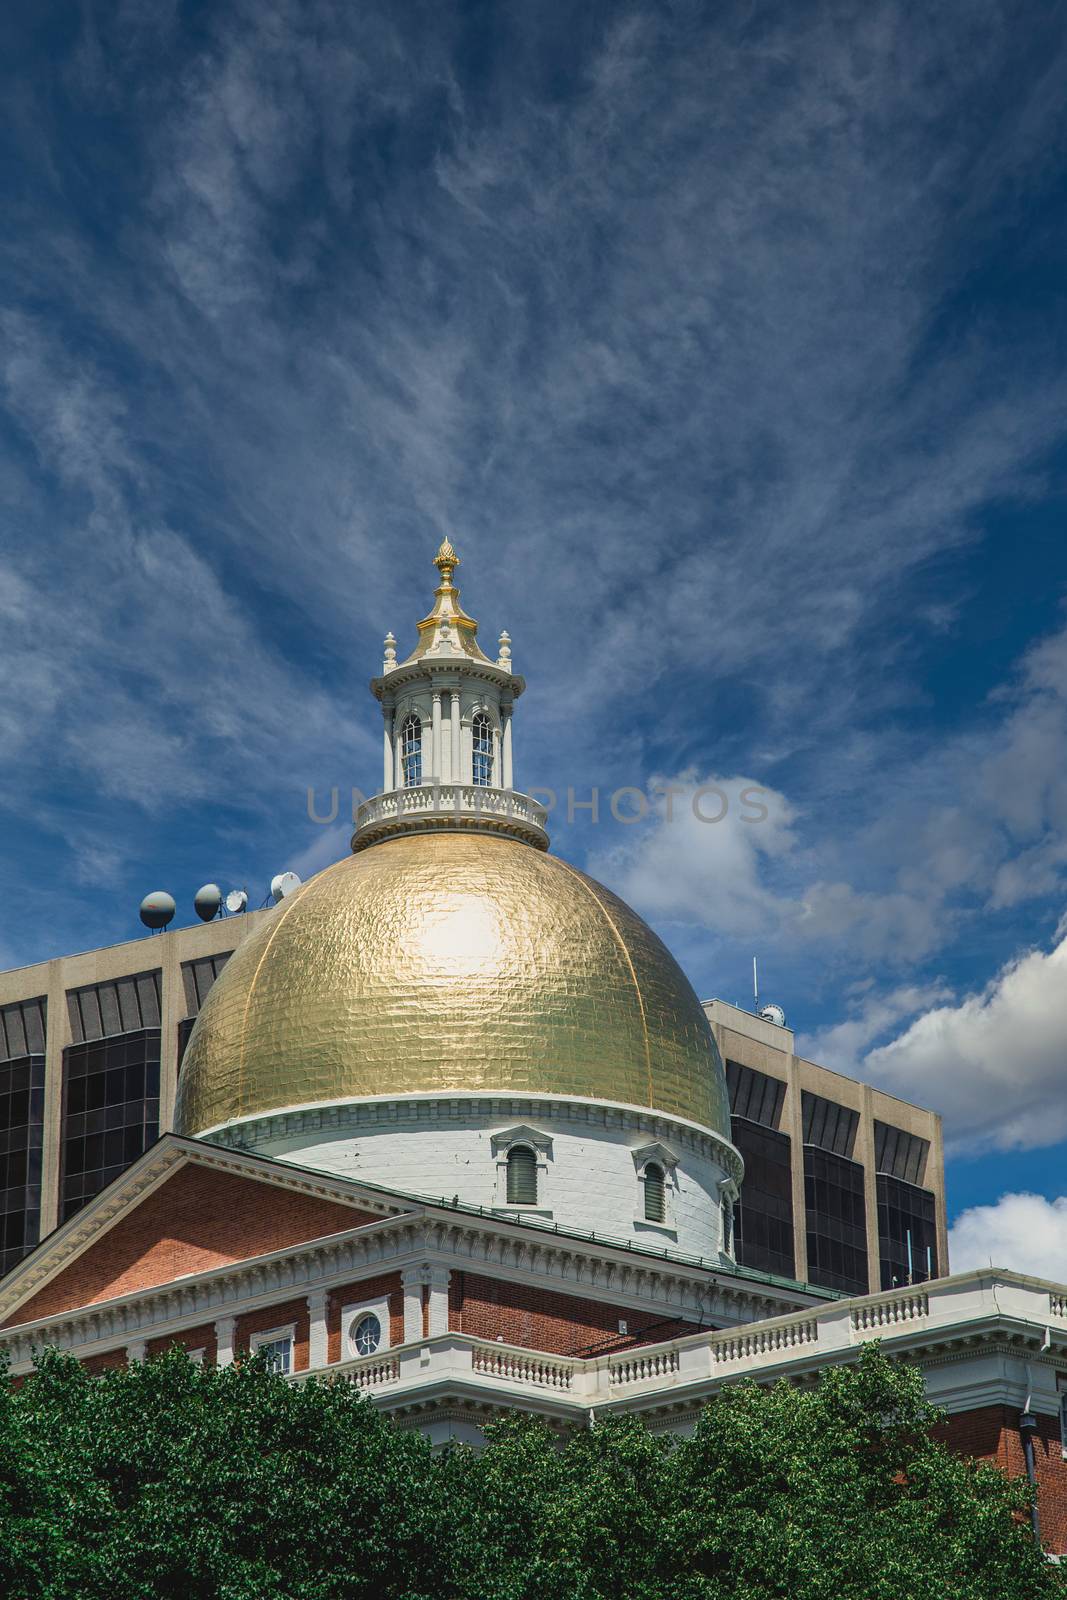 Gold Dome on the State House on Boston Commons